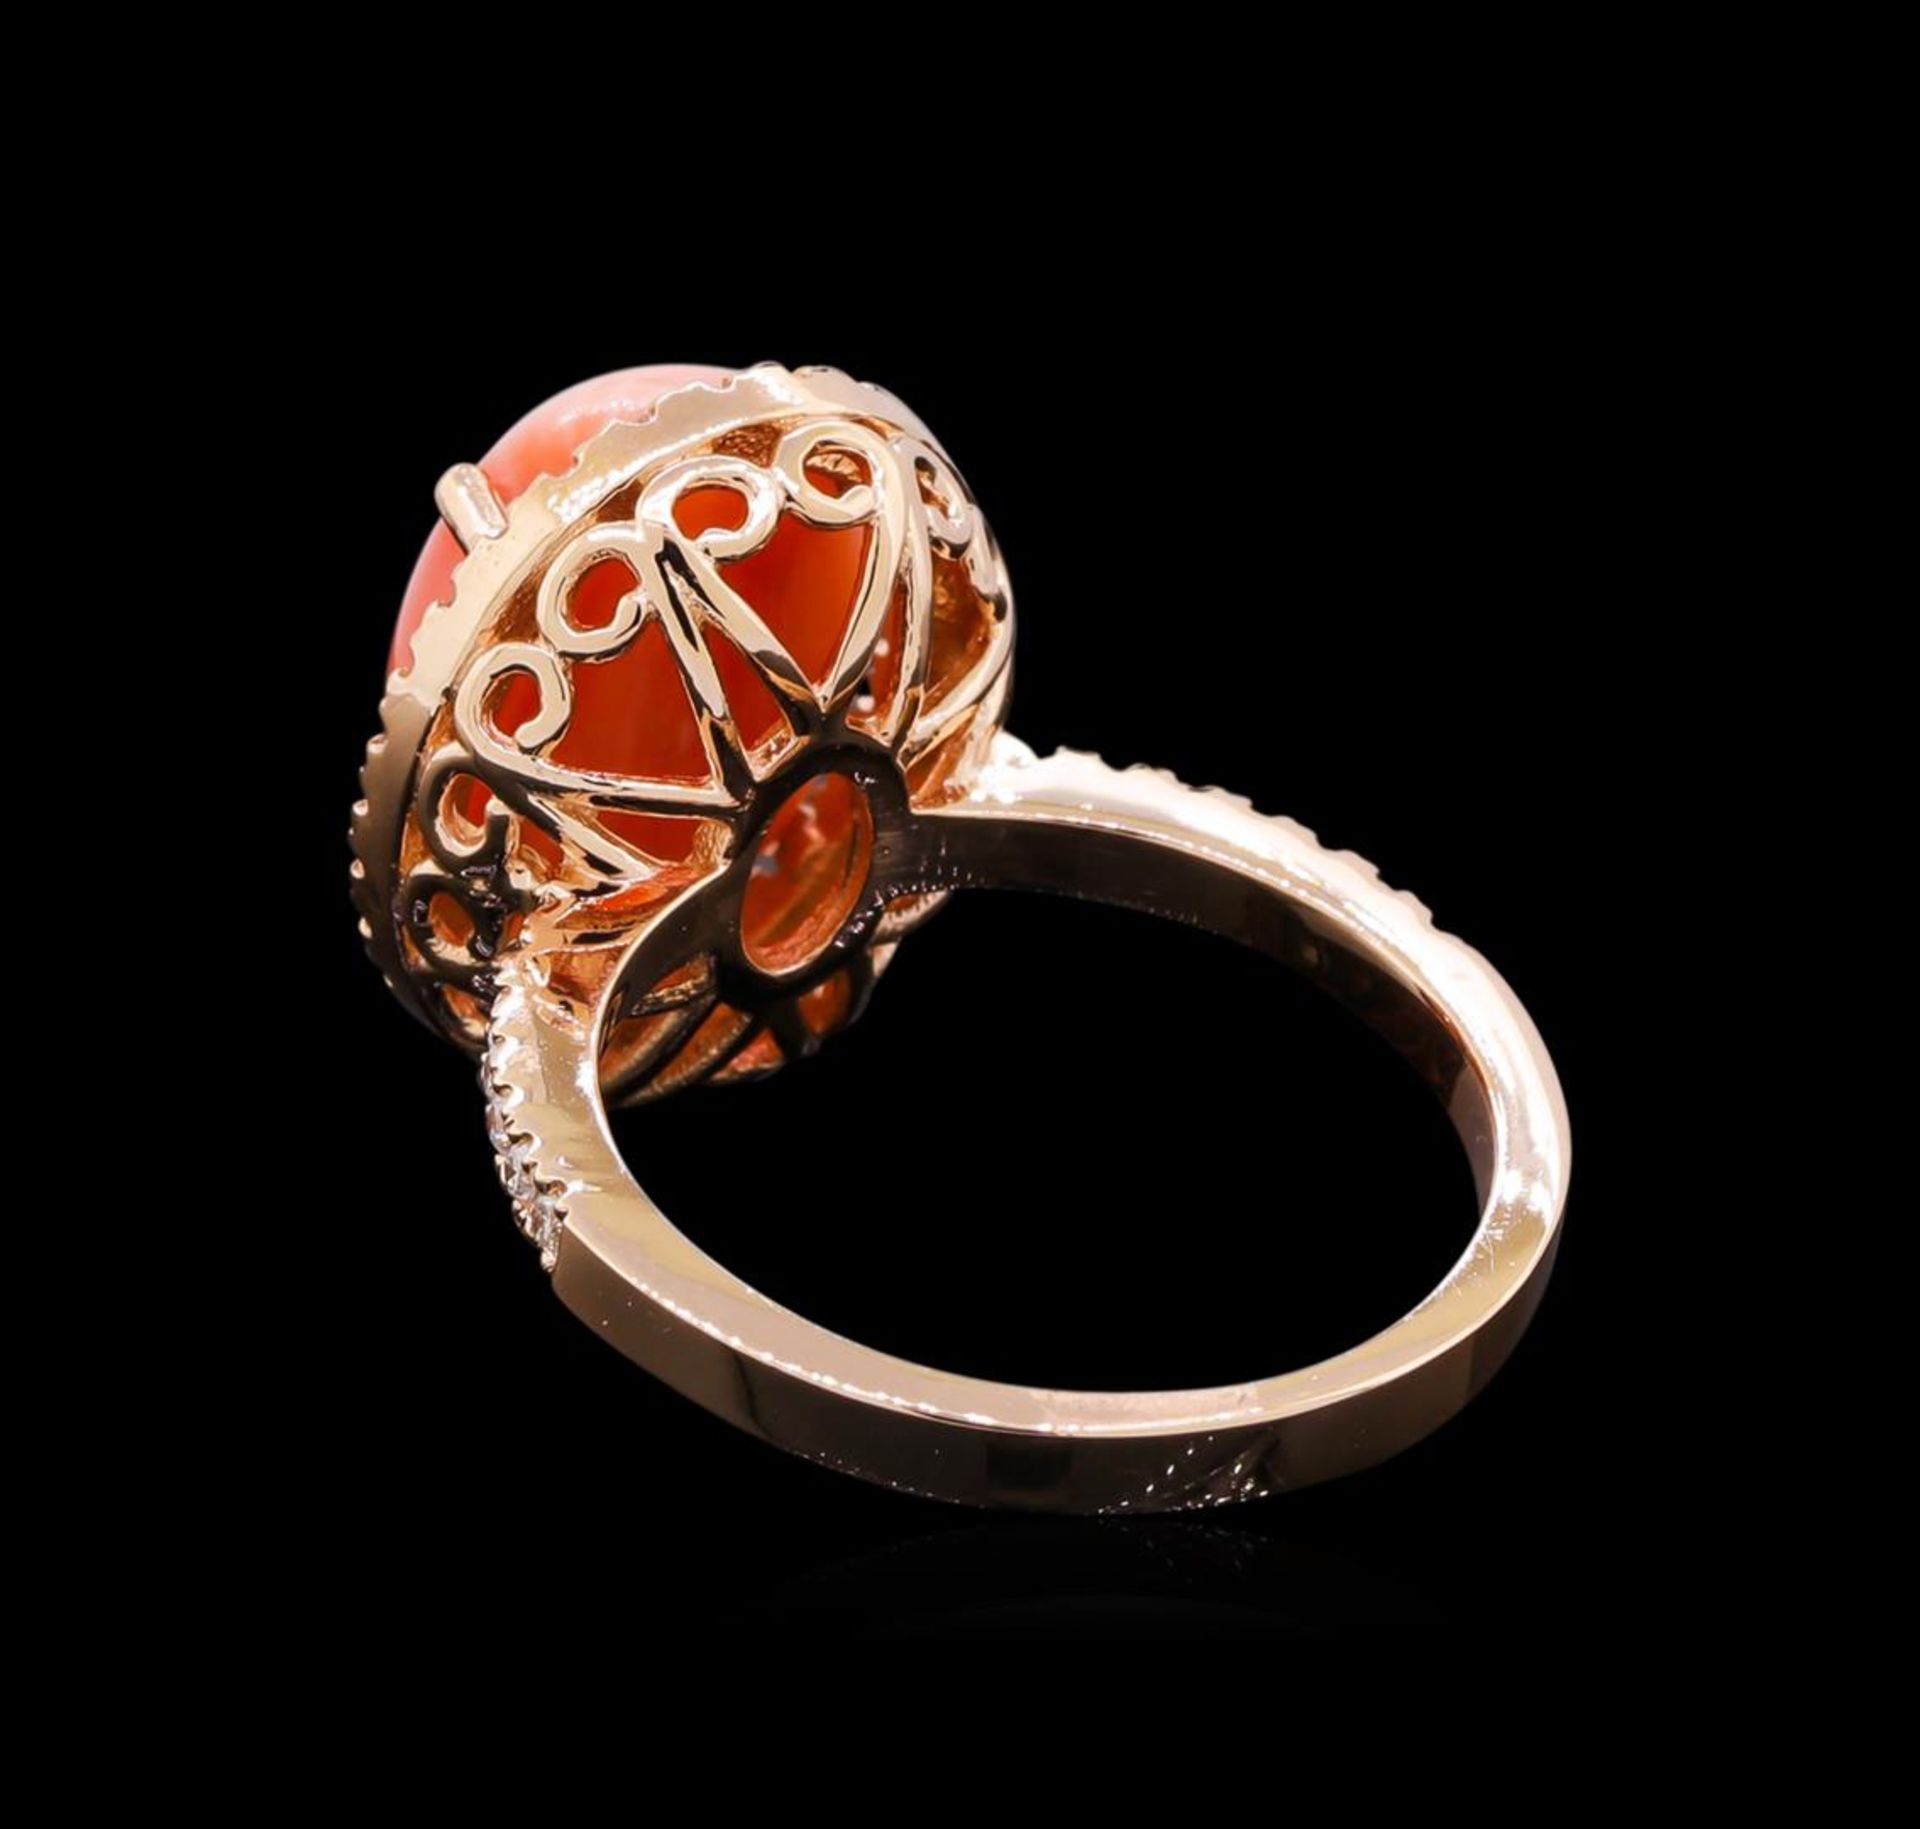 5.66 ctw Coral and Diamond Ring - 14KT Rose Gold - Image 3 of 4